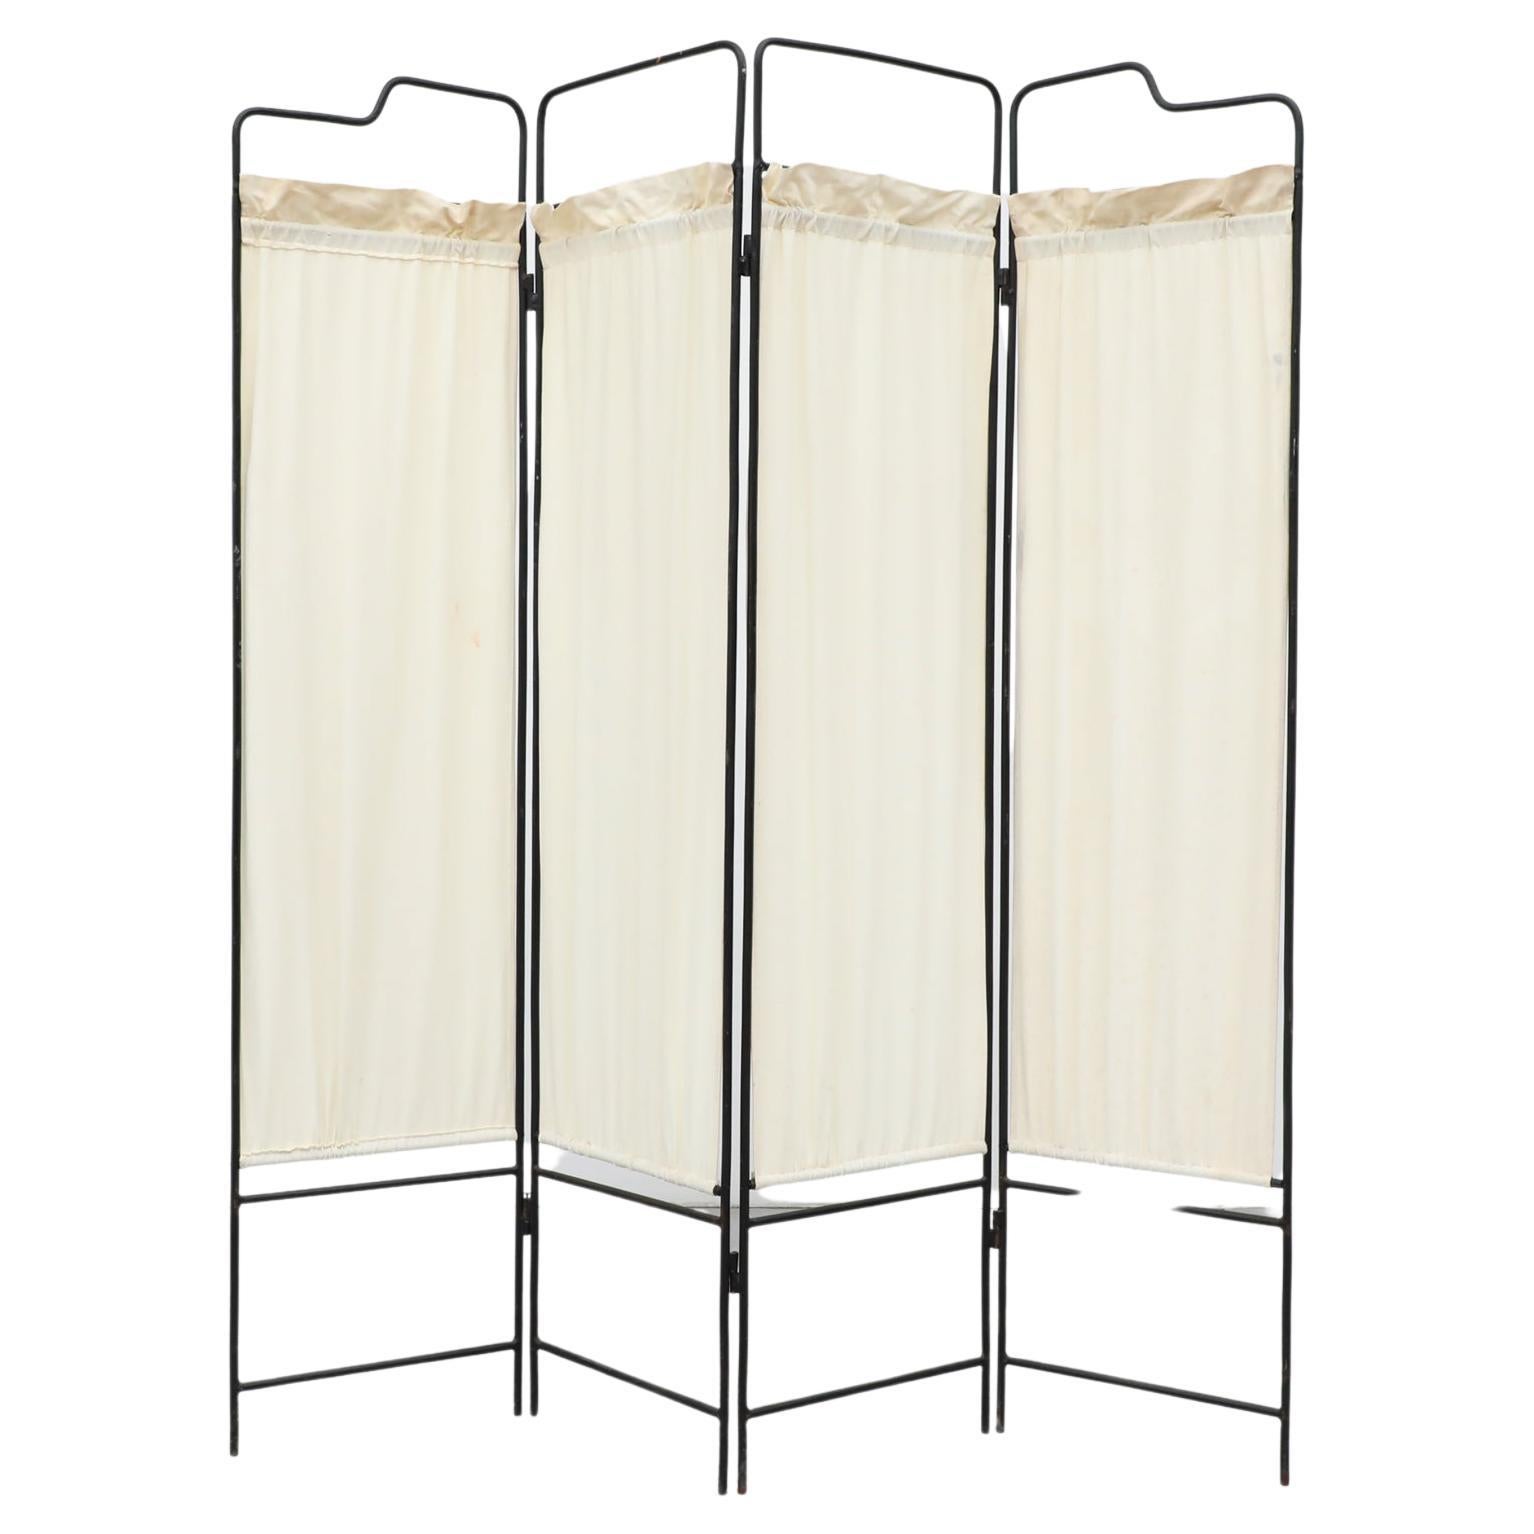 40's Deco Folding Privacy Screen or Room Divider